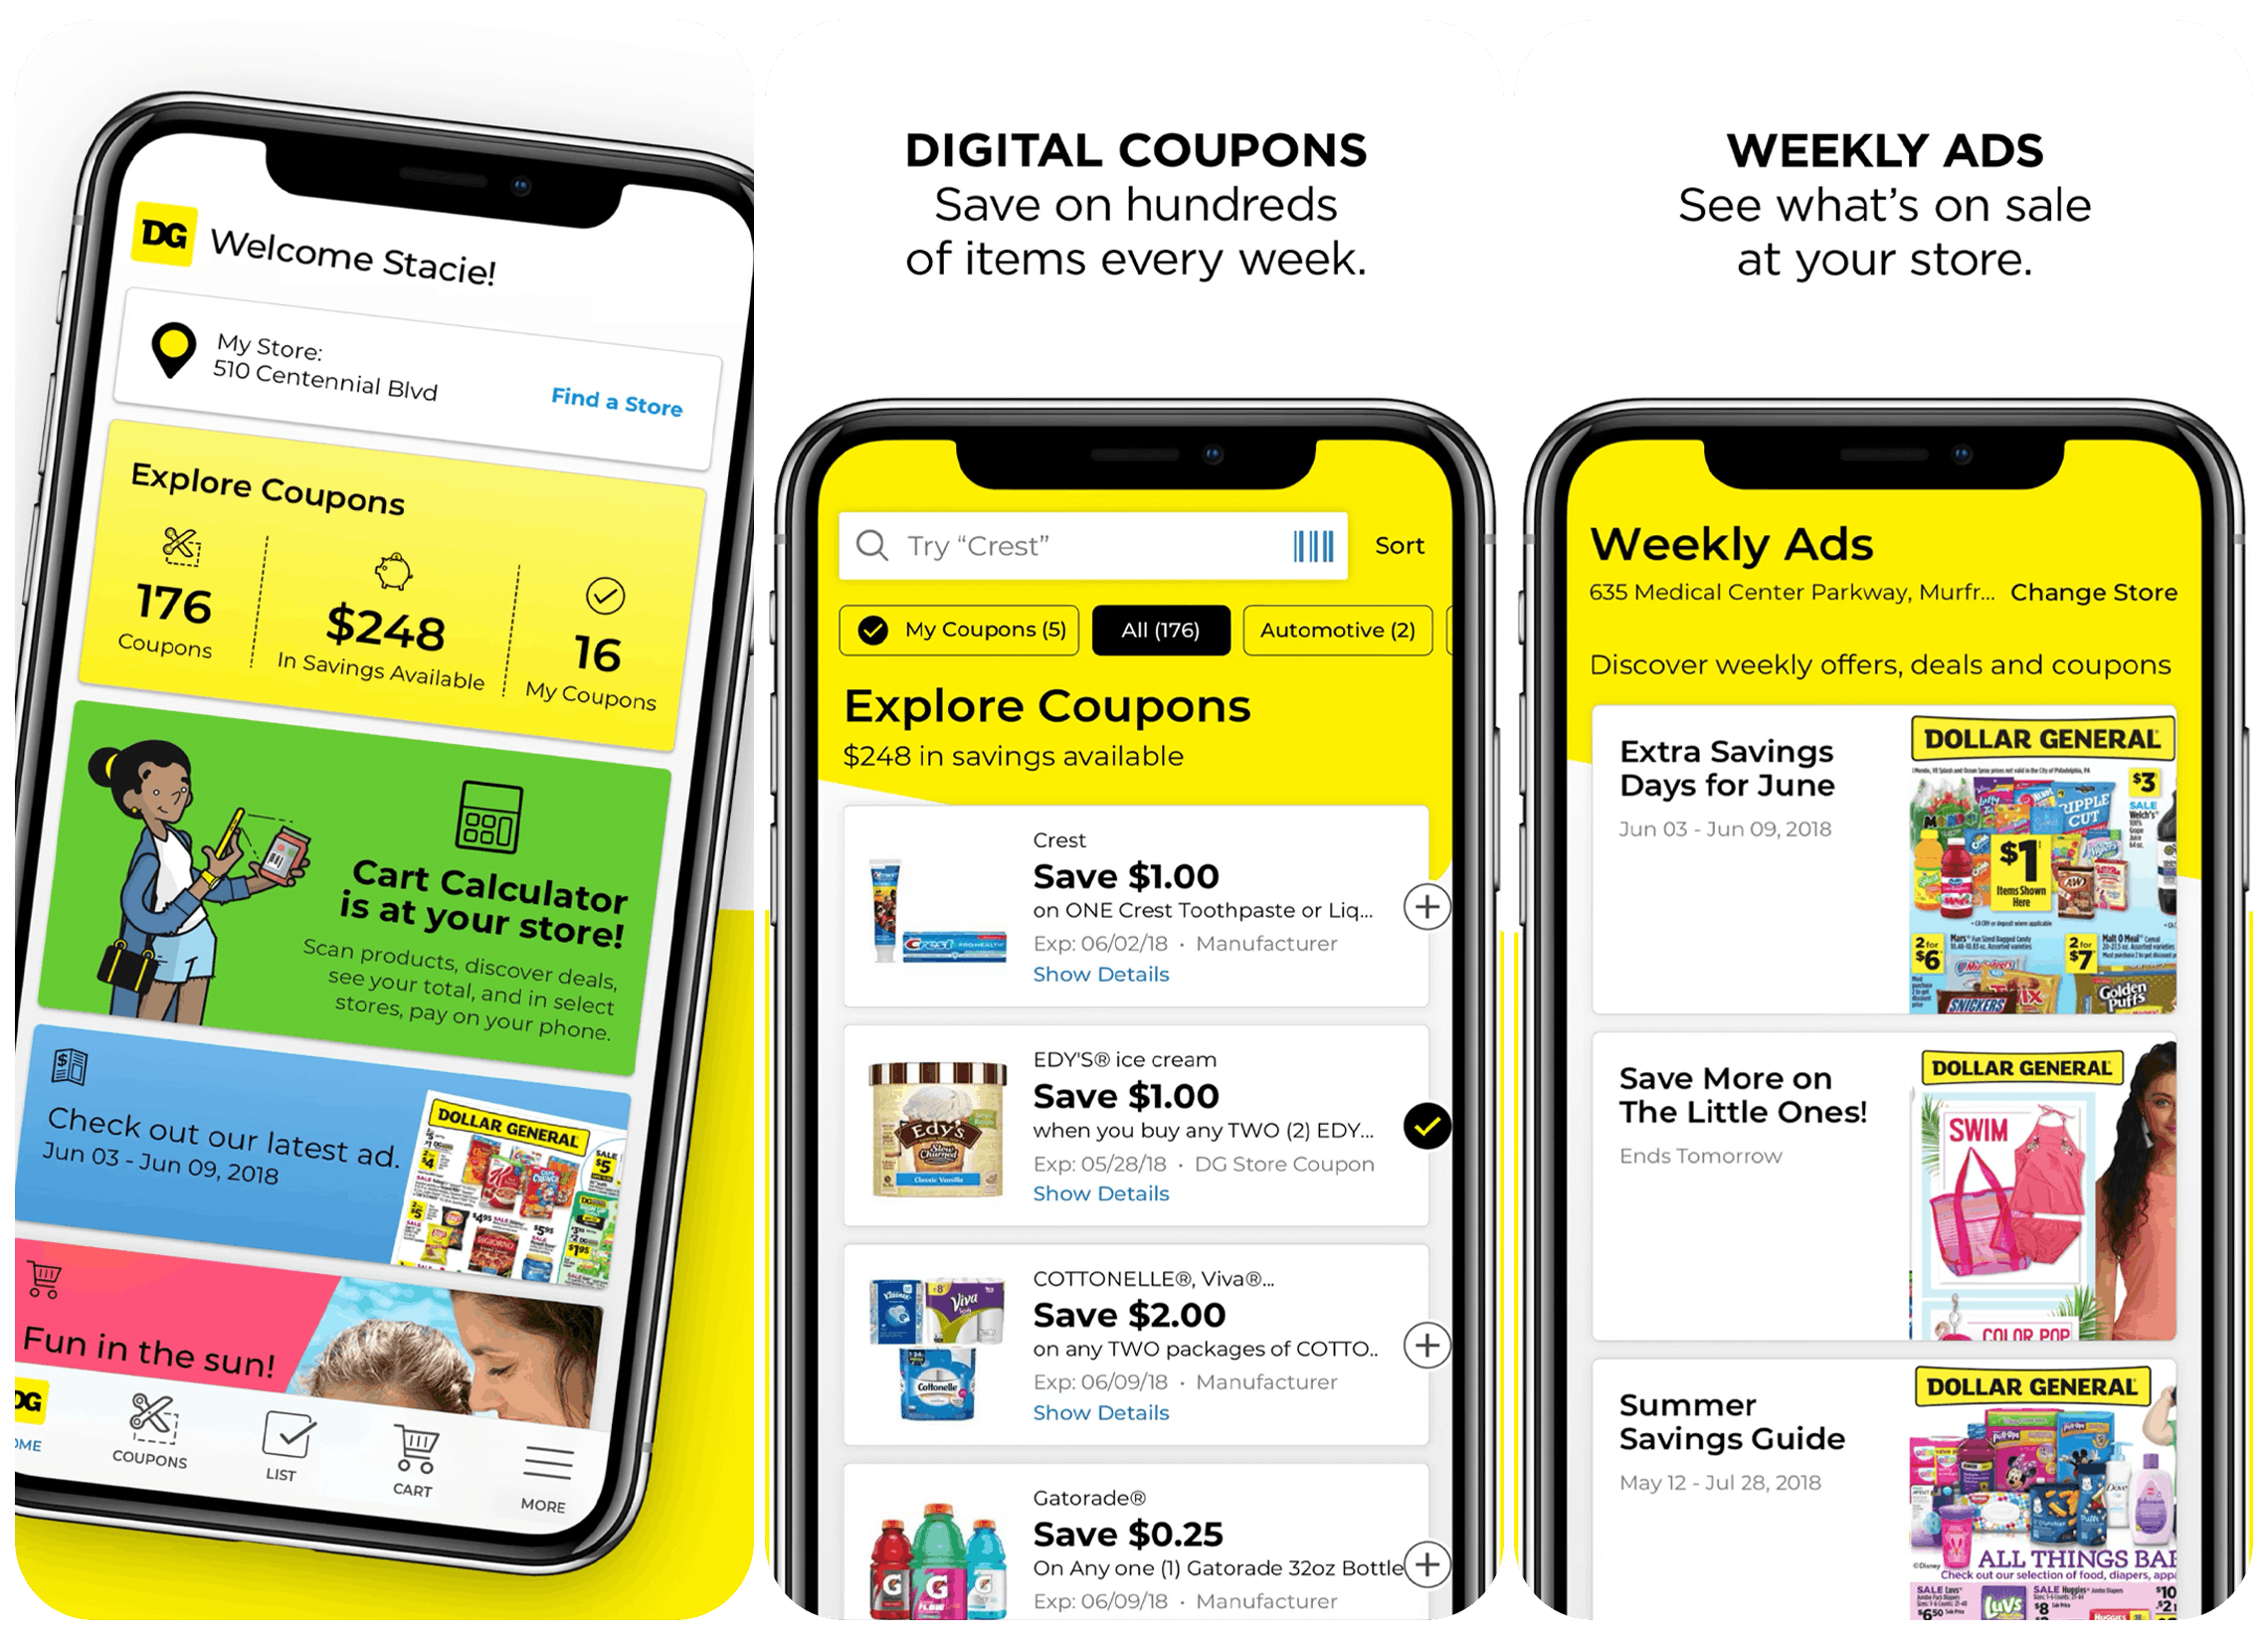 Your Dollar General App For Grocery Pickup Questions Answered The Krazy Coupon Lady